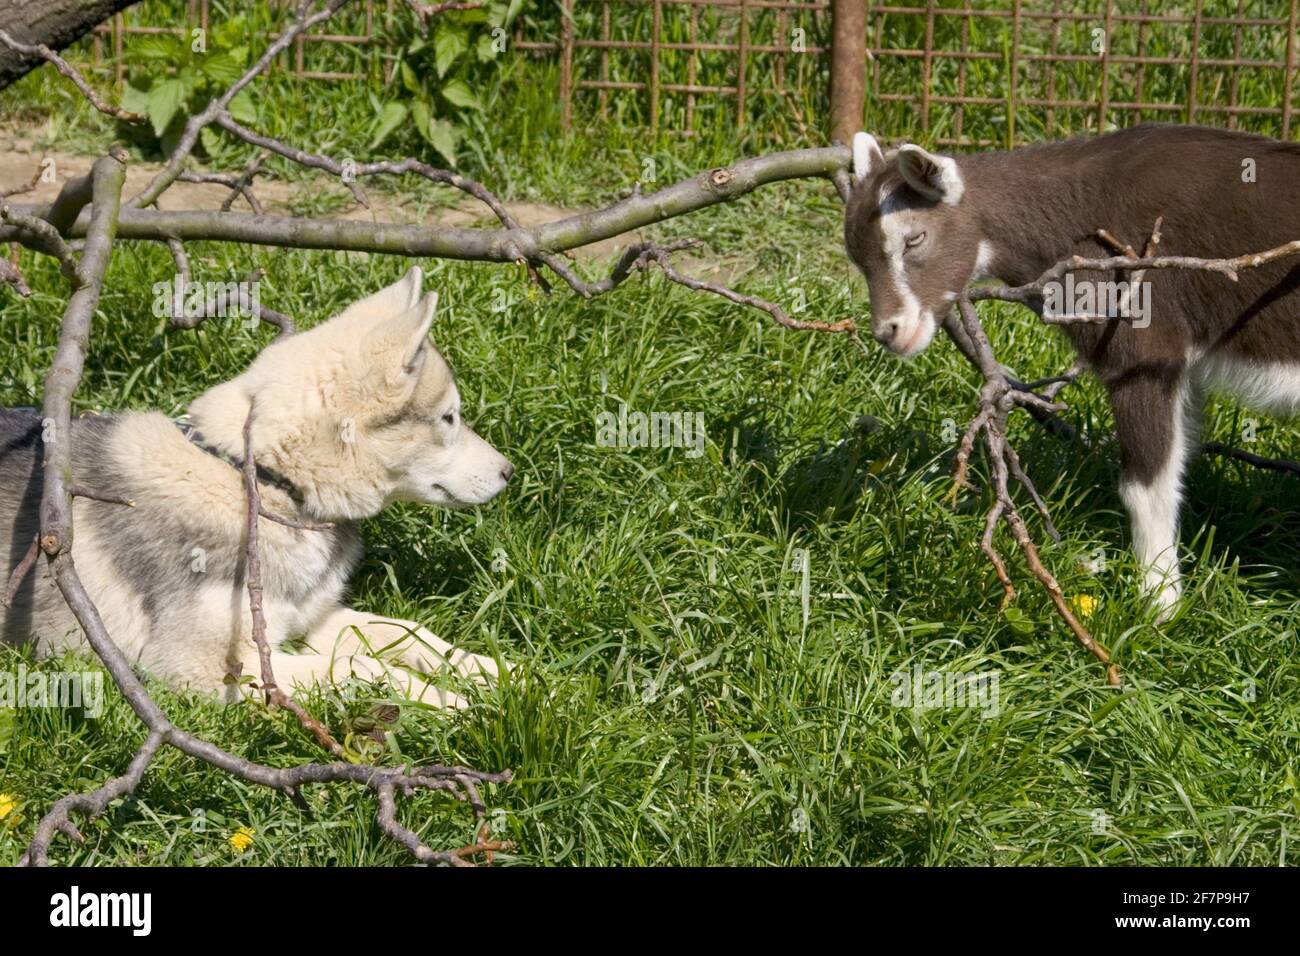 Siberian Husky (Canis lupus f. familiaris), Husky and goat are eyeing each other in a meadow, side view Stock Photo